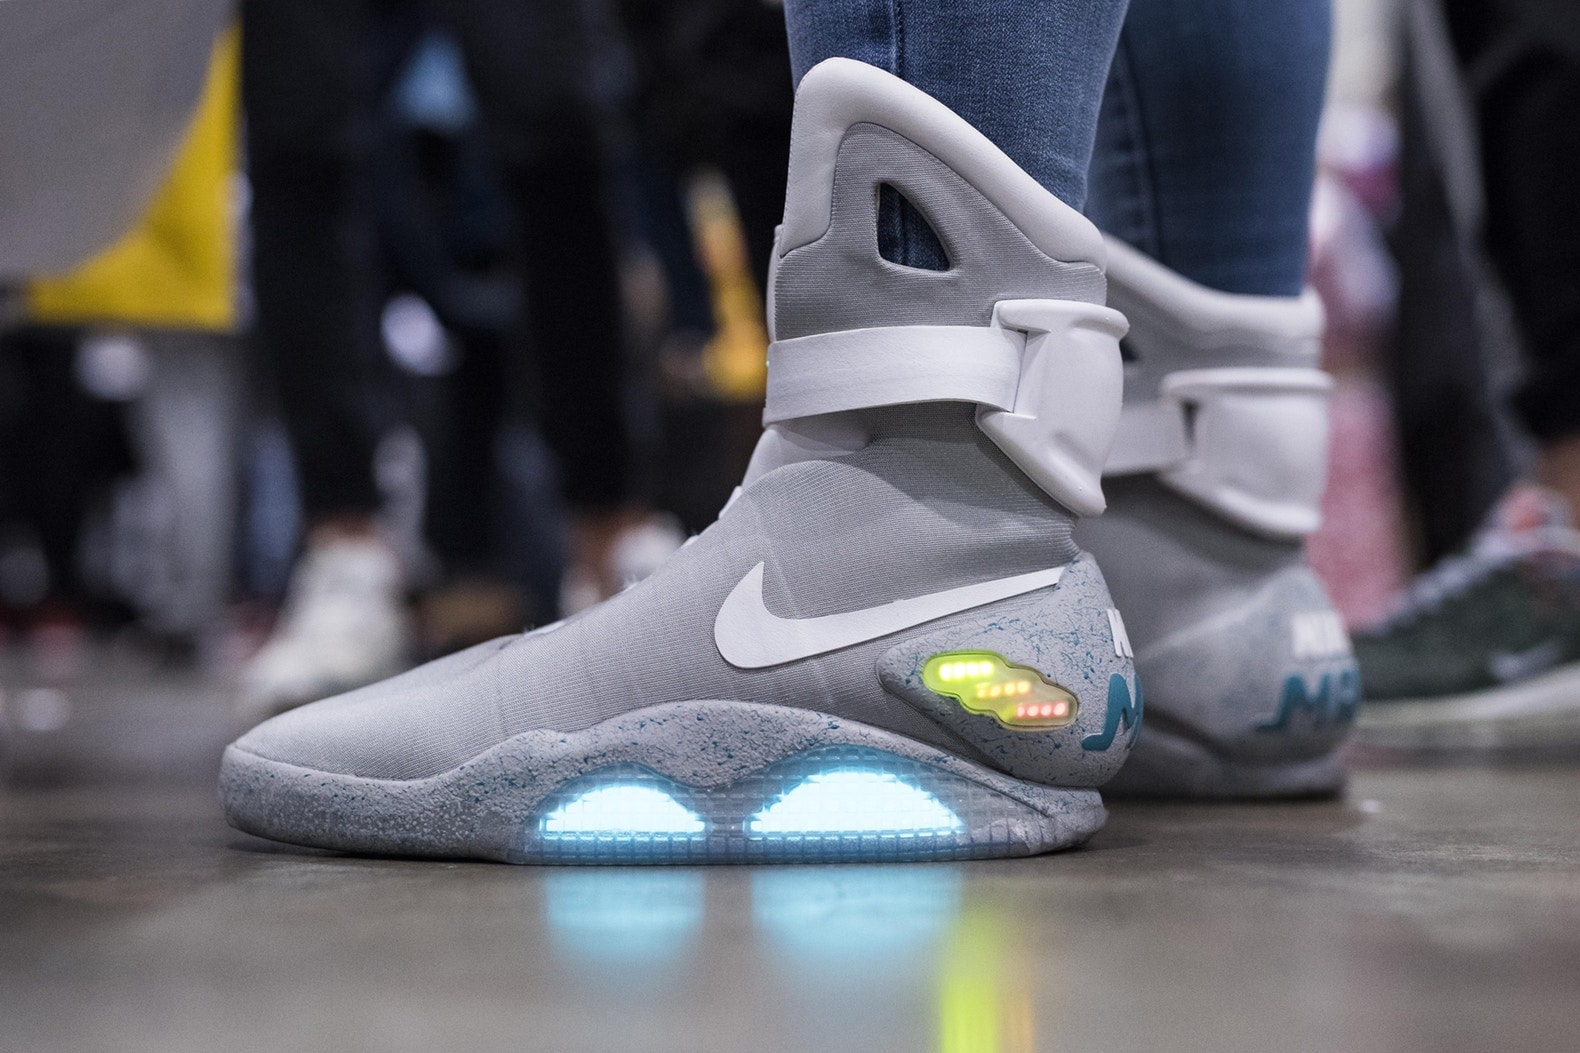 #OnFeet at Sneaker Con Melbourne